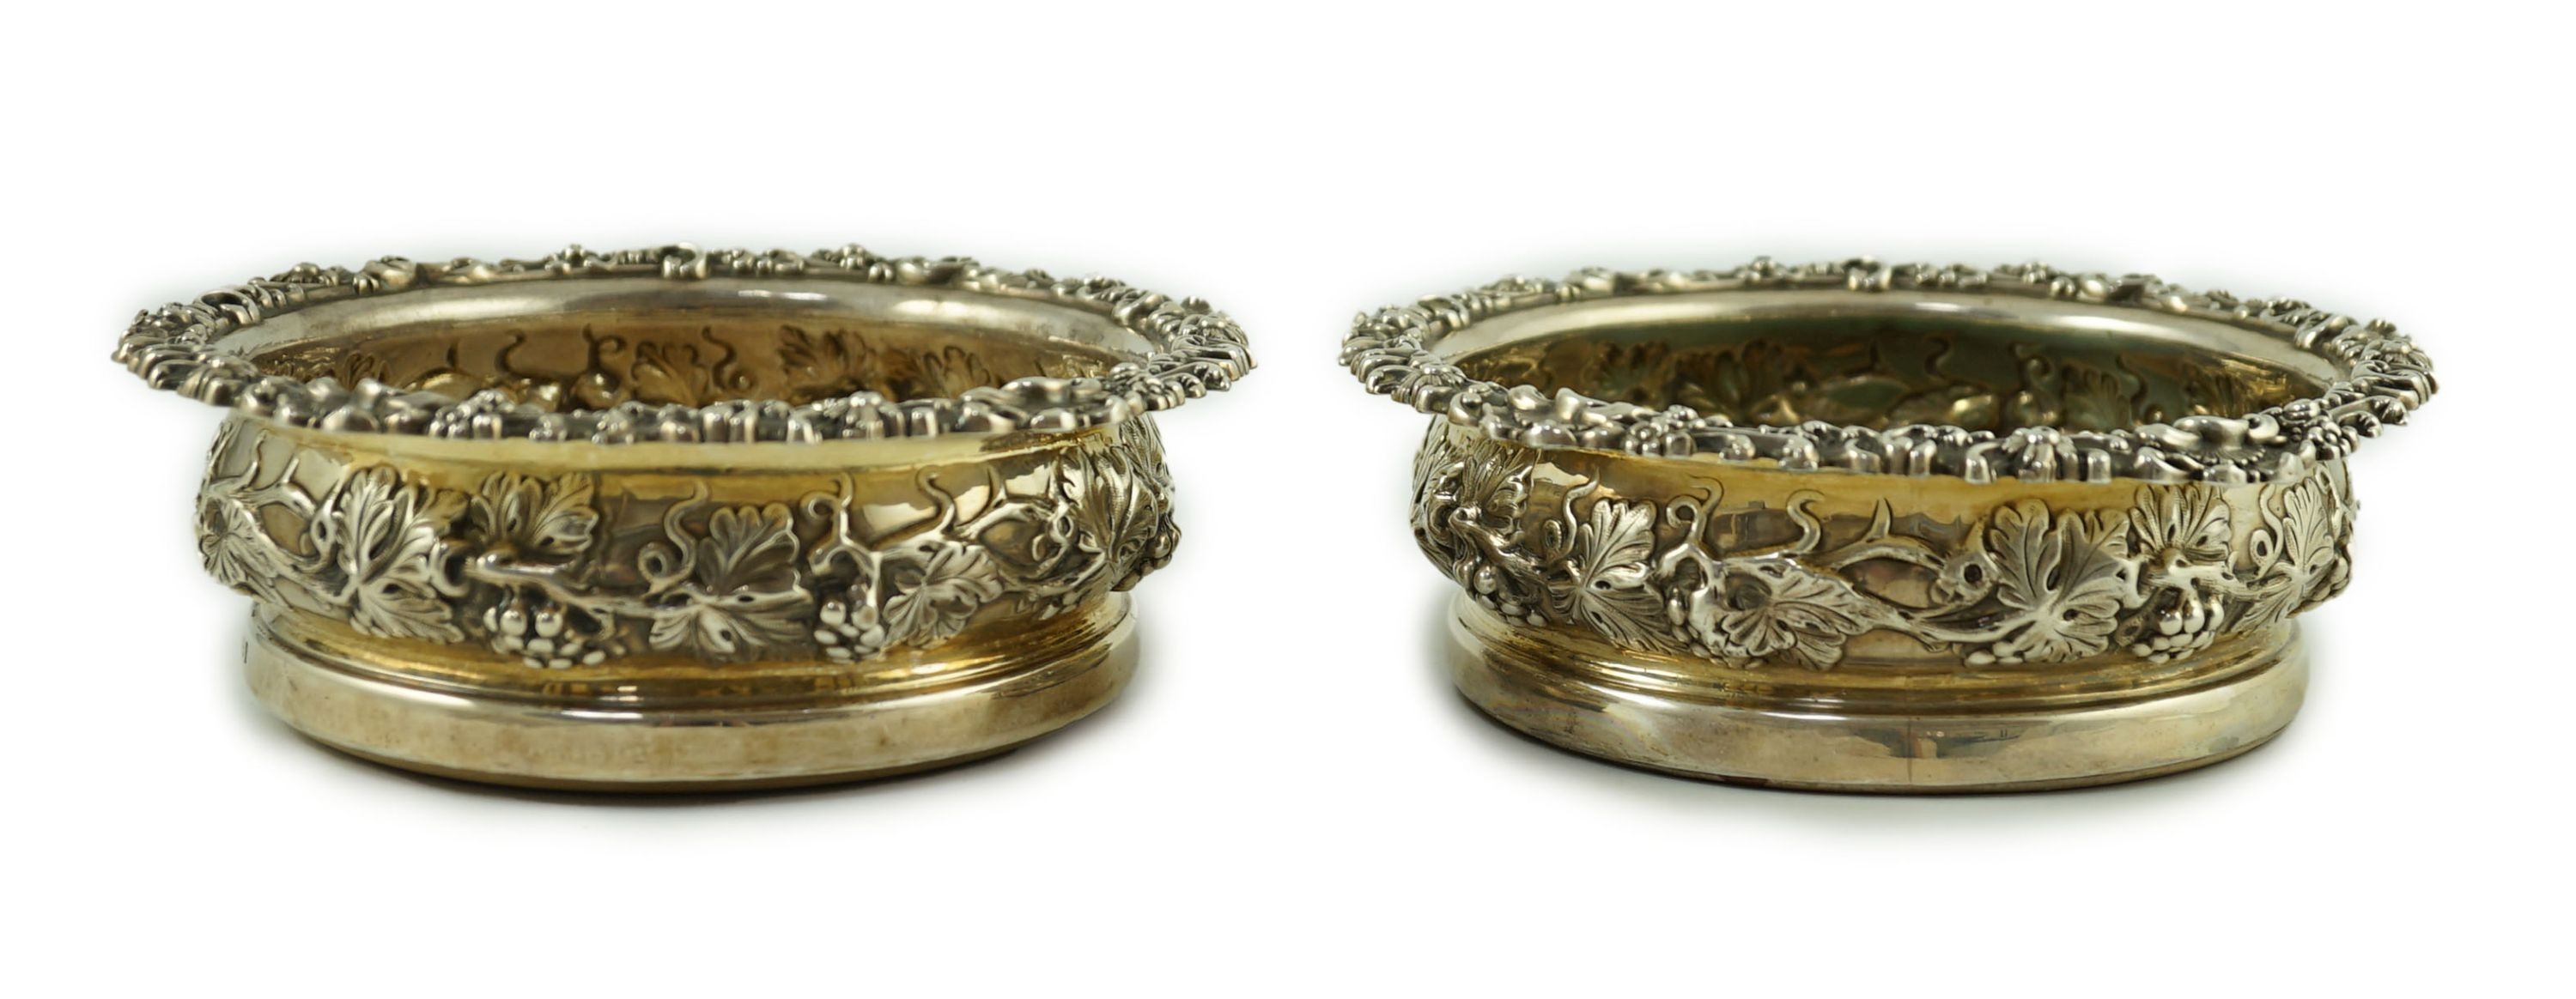 A pair of George IV silver mounted wine coasters, by S.C. Younge & Co